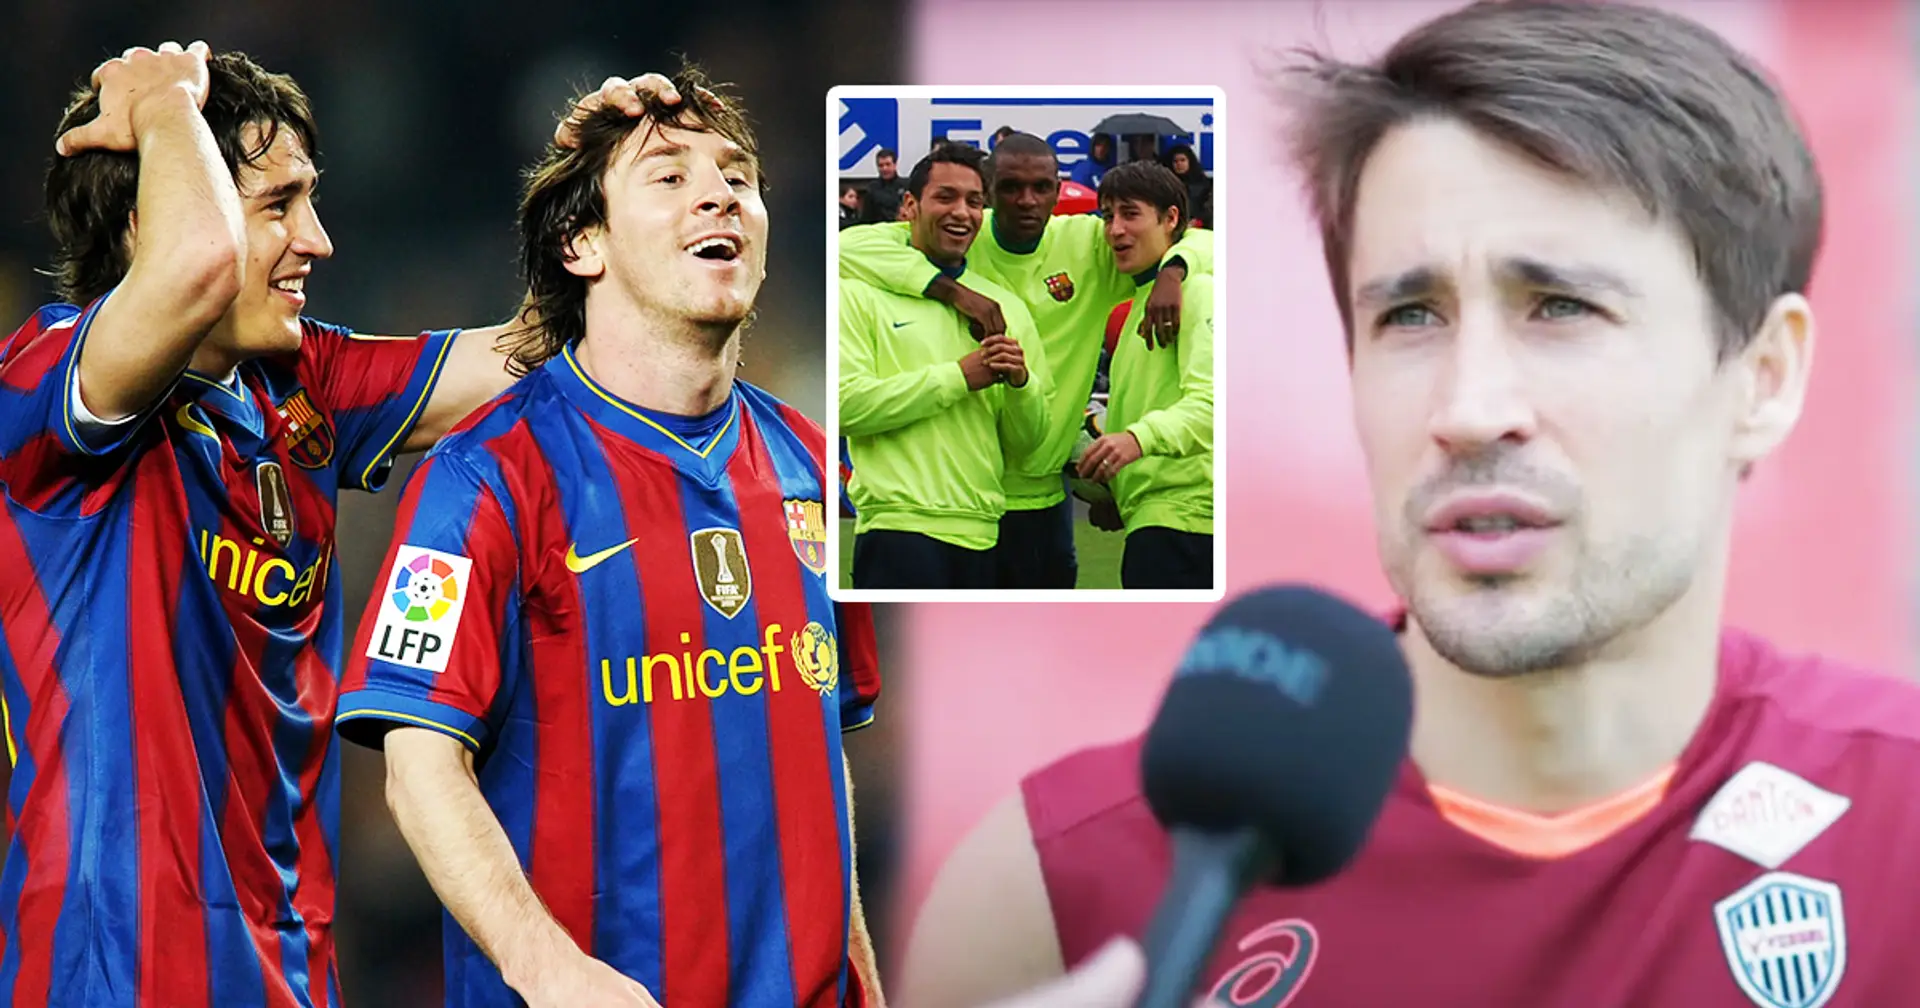 'Leo is unbelievable. But he was something different': Bojan asked to name the best player he played with - it's NOT Lionel Messi